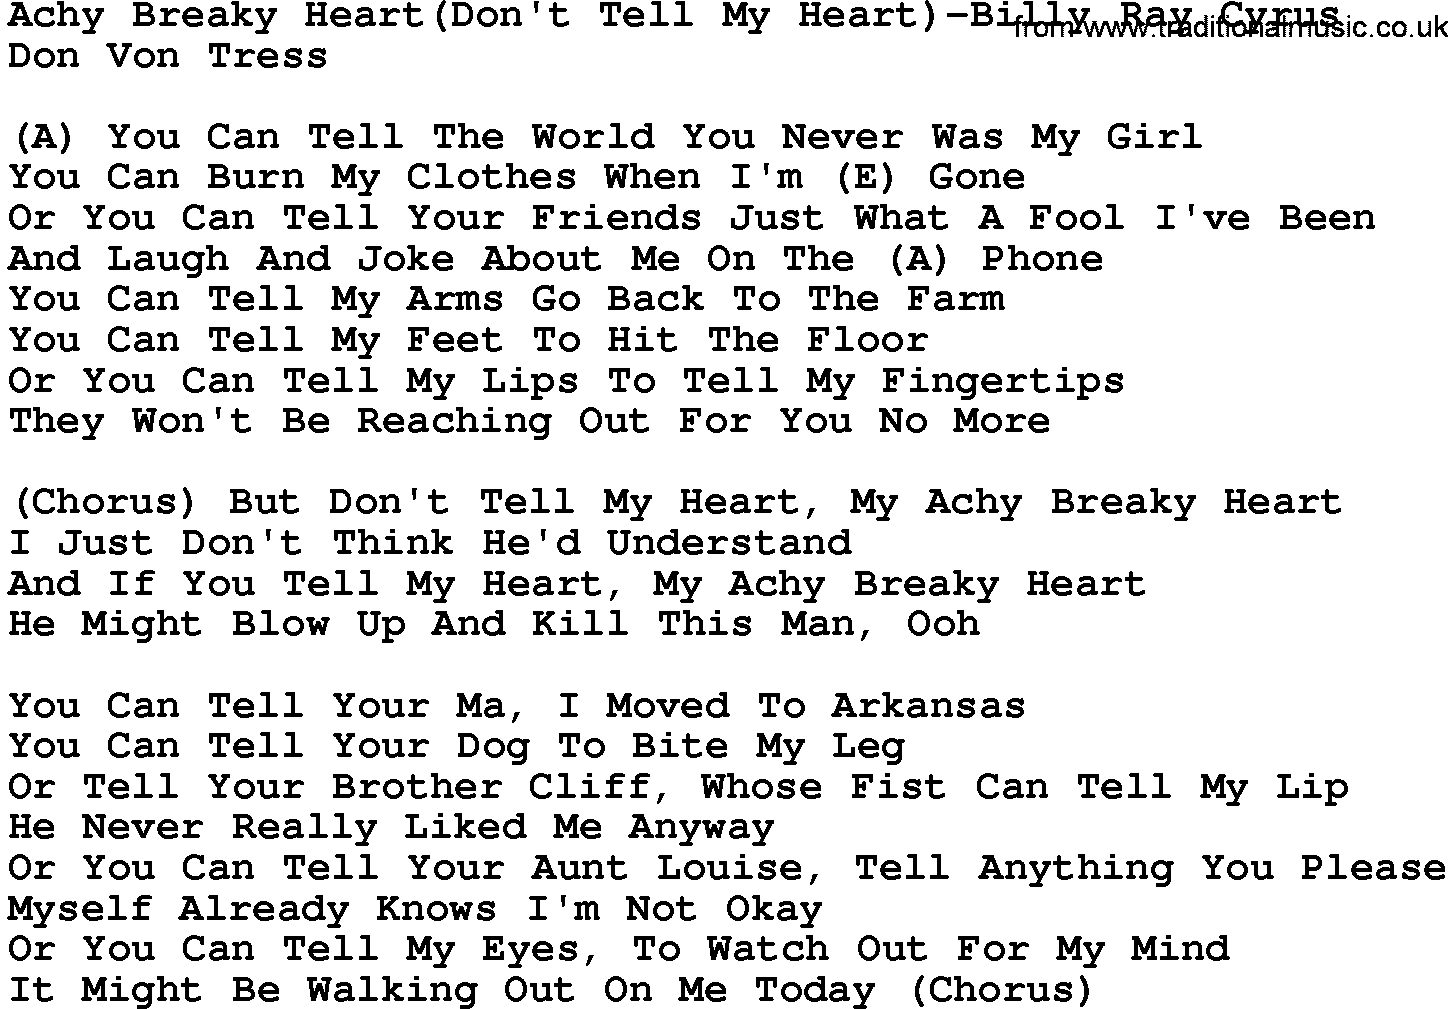 Country music song: Achy Breaky Heart(Don't Tell My Heart)-Billy Ray Cyrus lyrics and chords